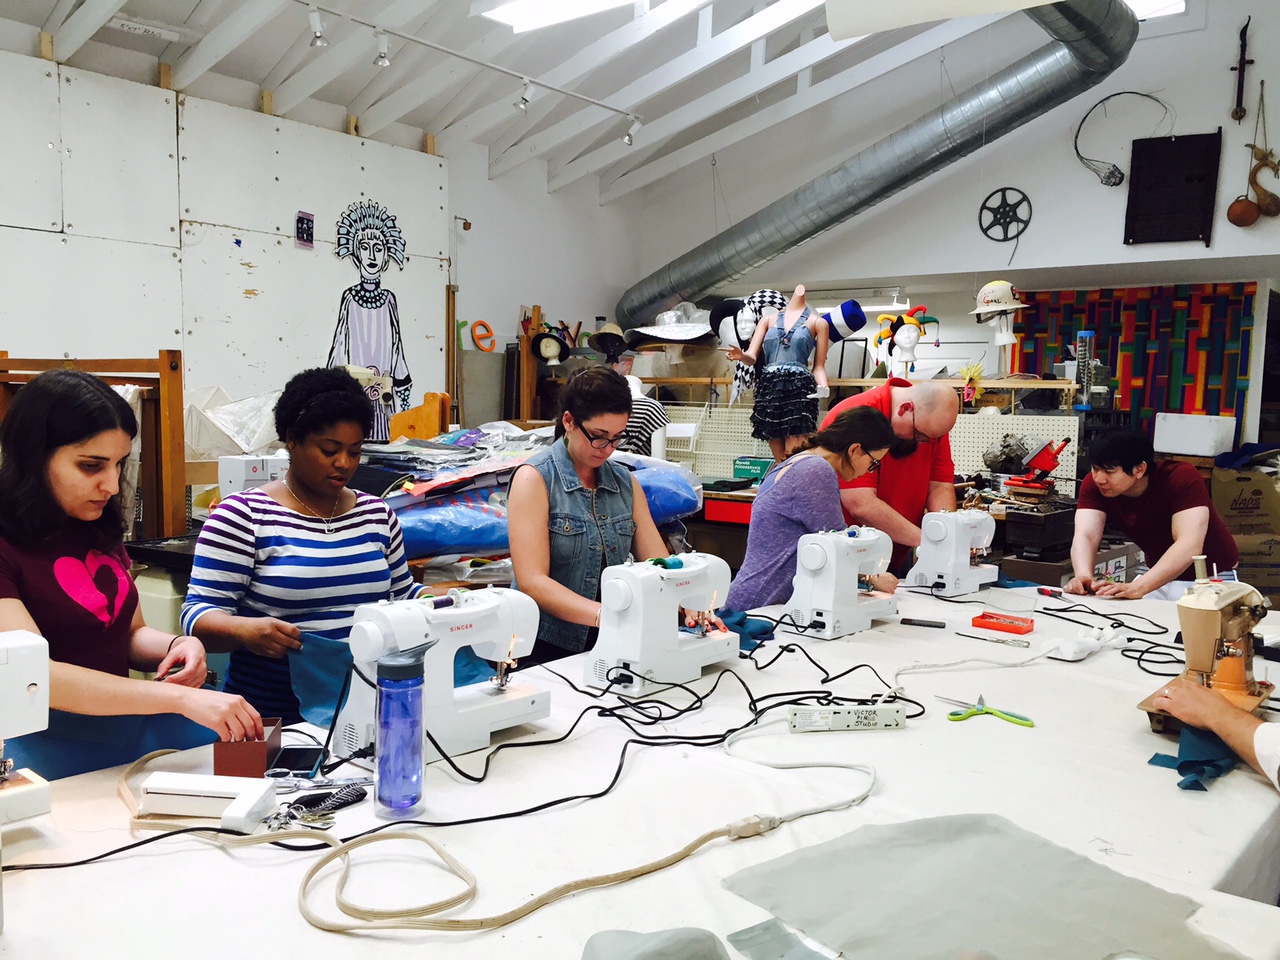 Re-Crafting Education: A lab that knits together learns together